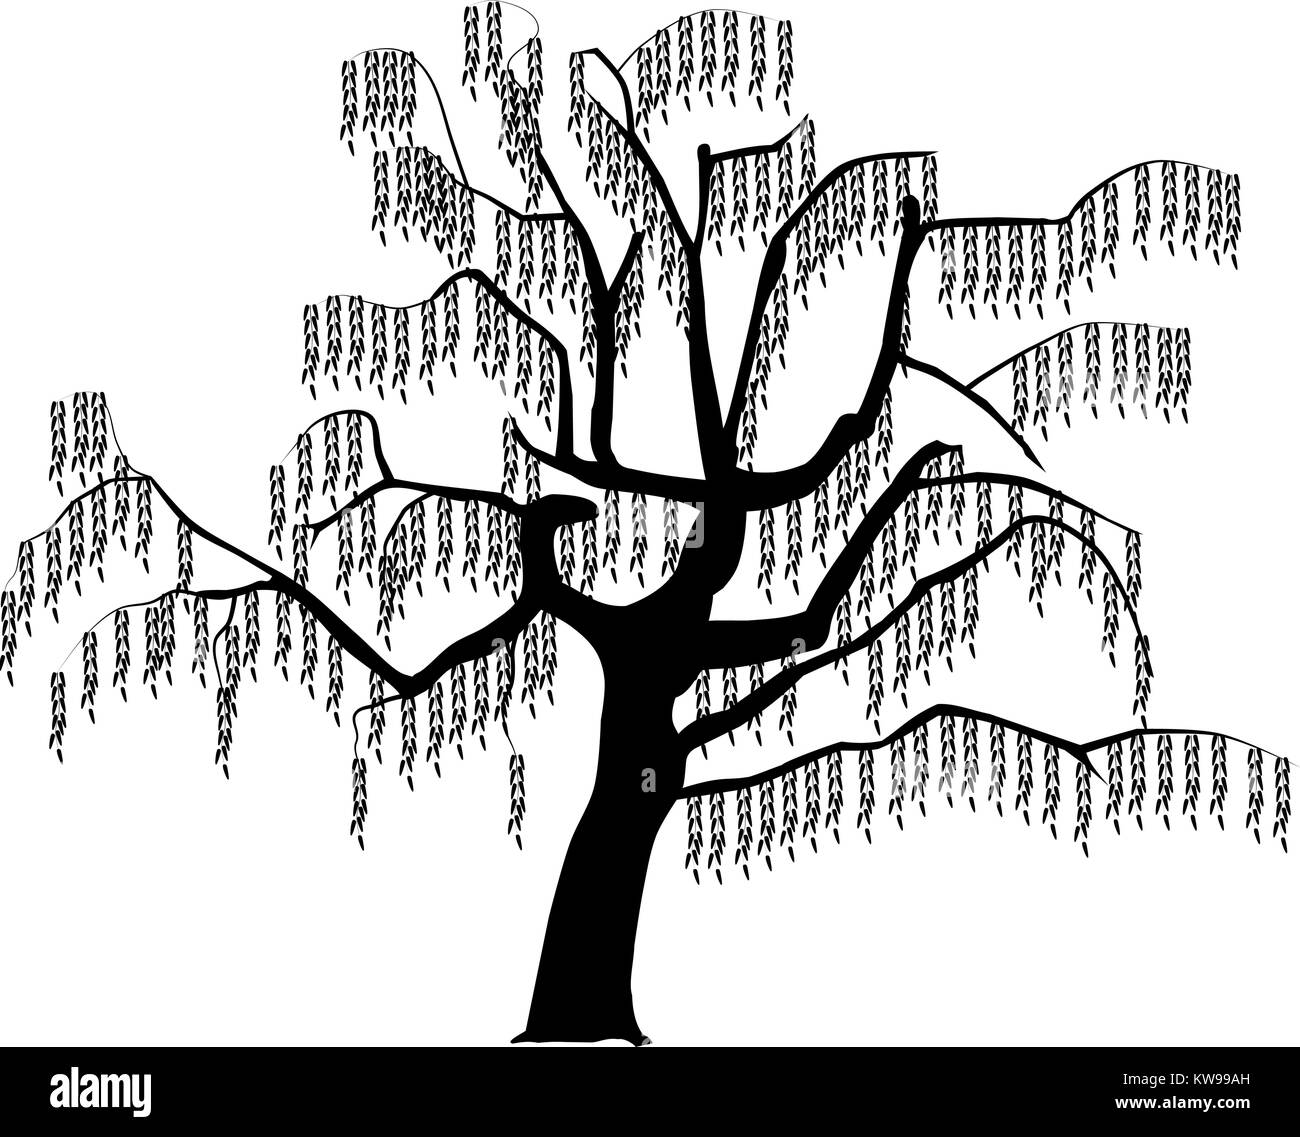 vector image of a tree in black/white Stock Vector